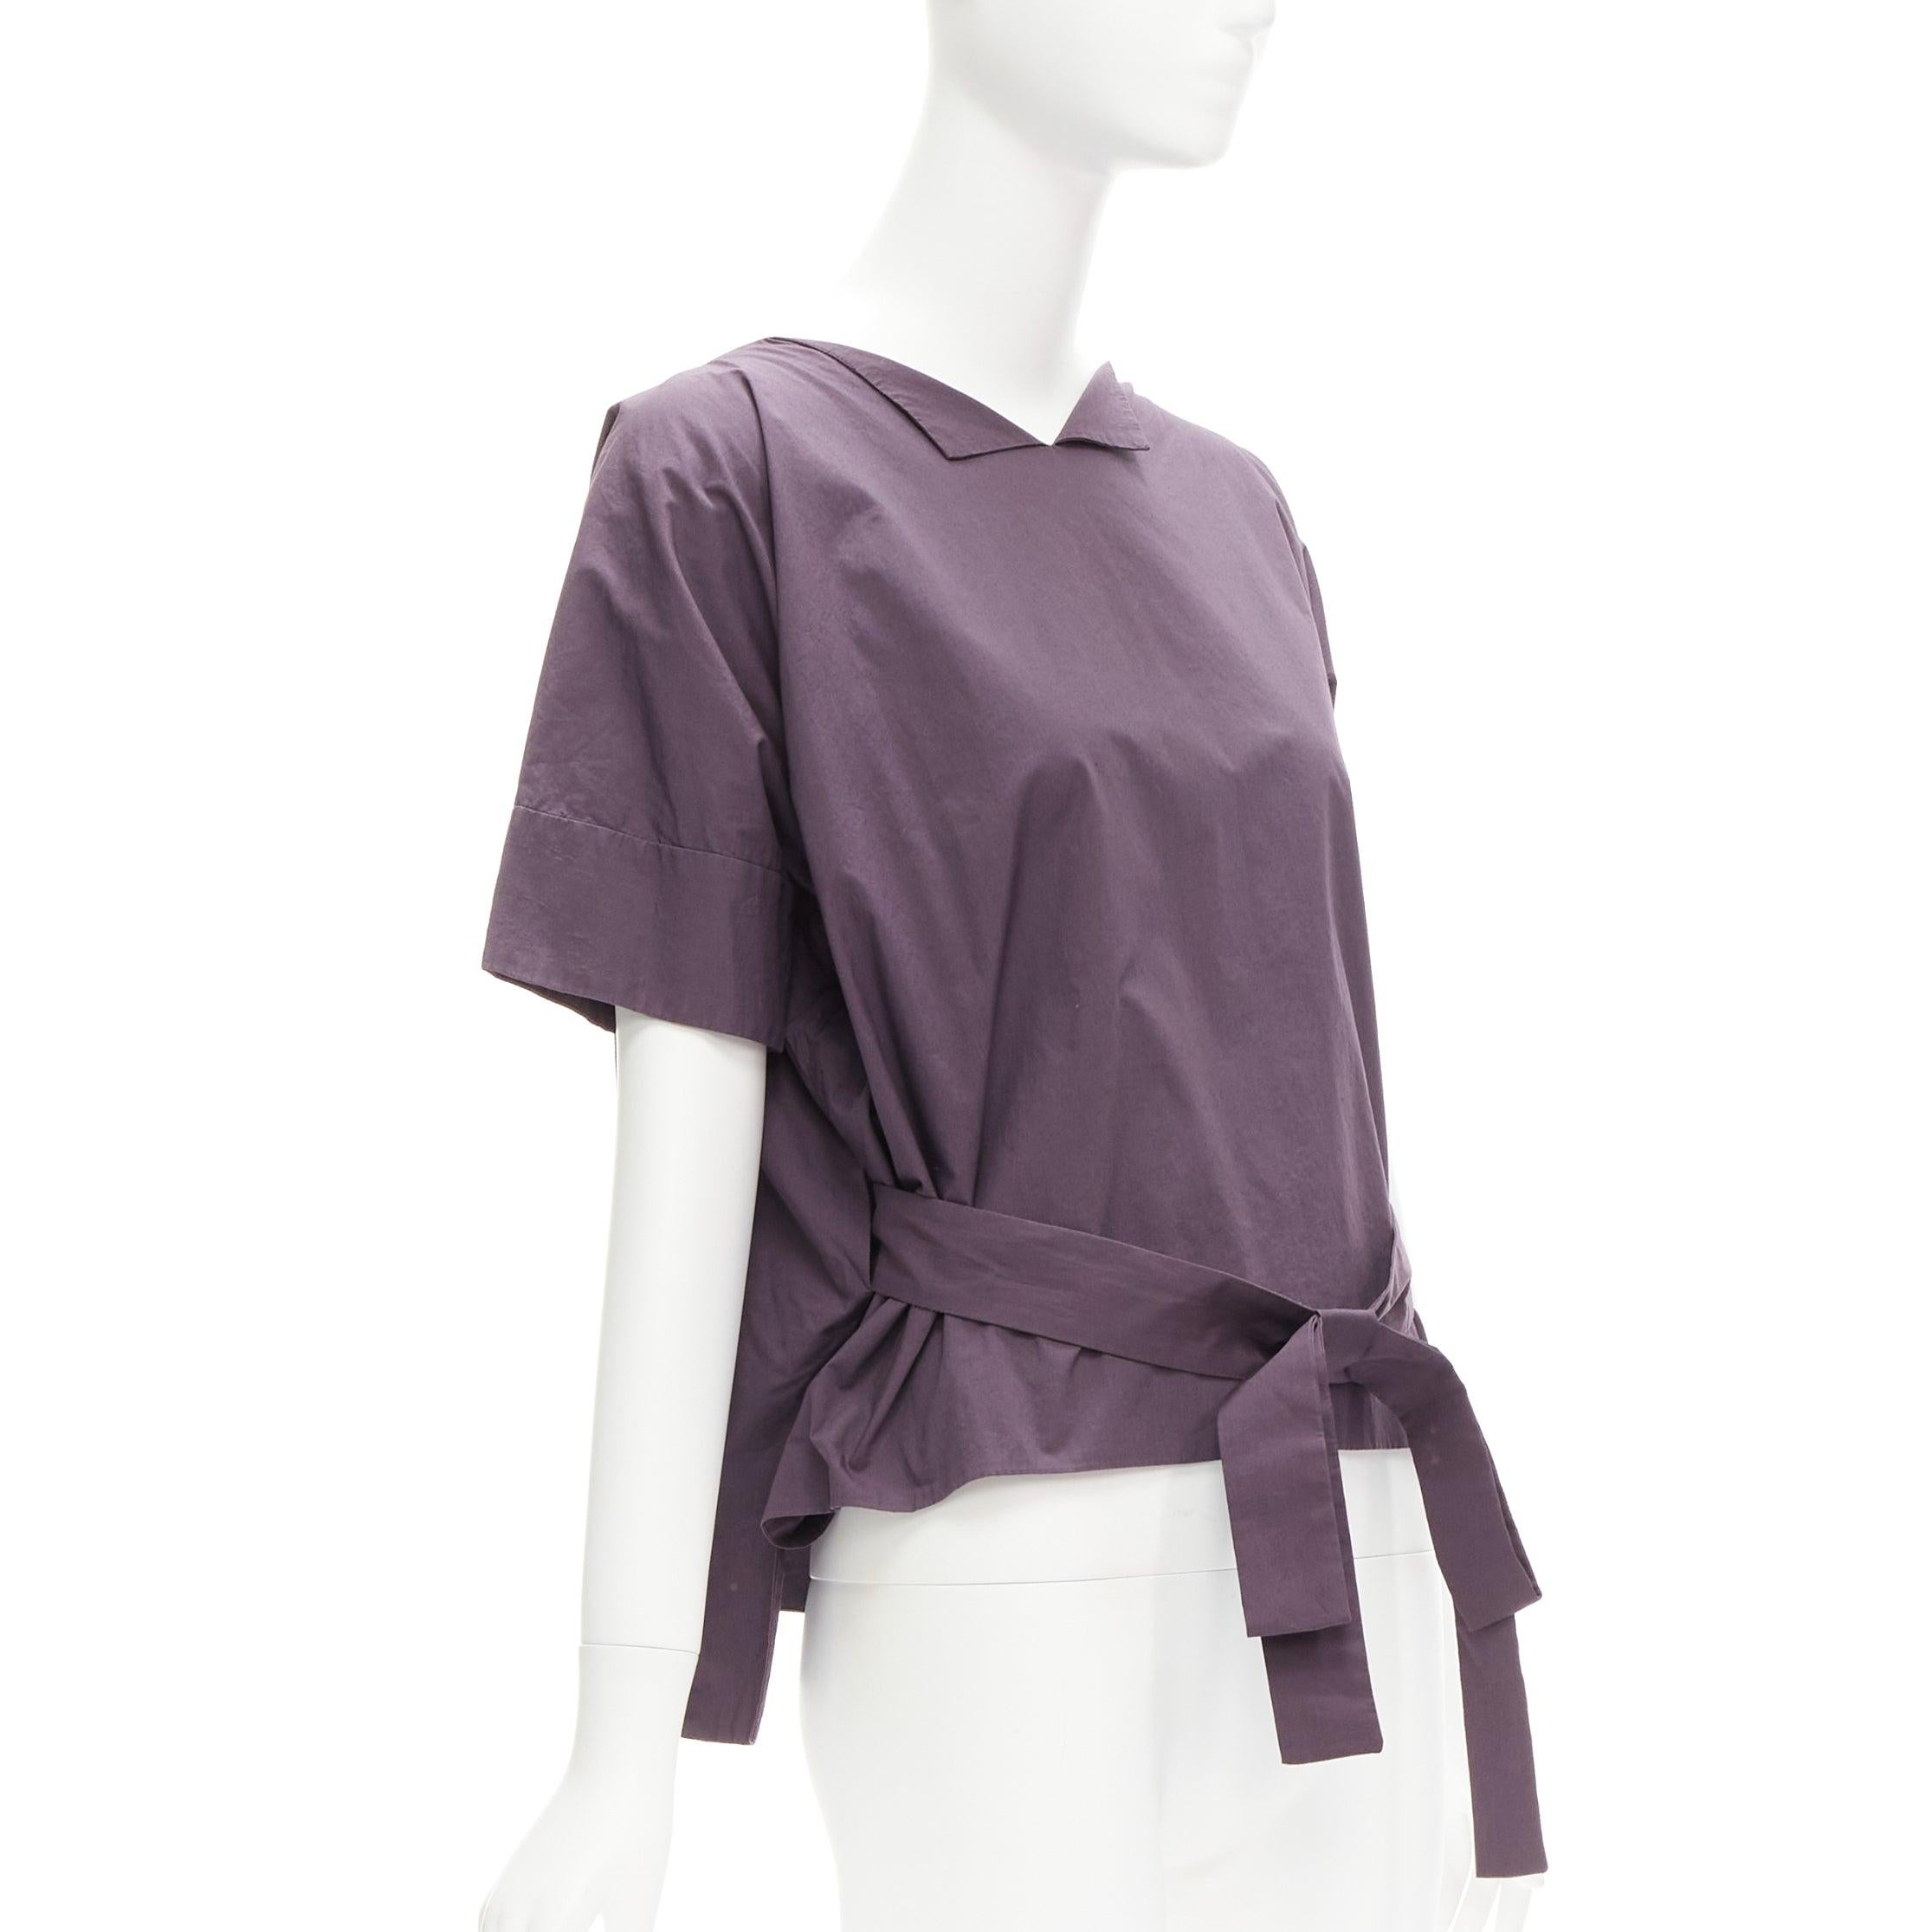 MARNI 100% cotton purple V collar bow belt boxy top IT38 XS
Reference: CELG/A00312
Brand: Marni
Material: Cotton
Color: Purple
Pattern: Solid
Closure: Belt
Extra Details: can be worn without bow belt
Made in: Italy

CONDITION:
Condition: Very good,